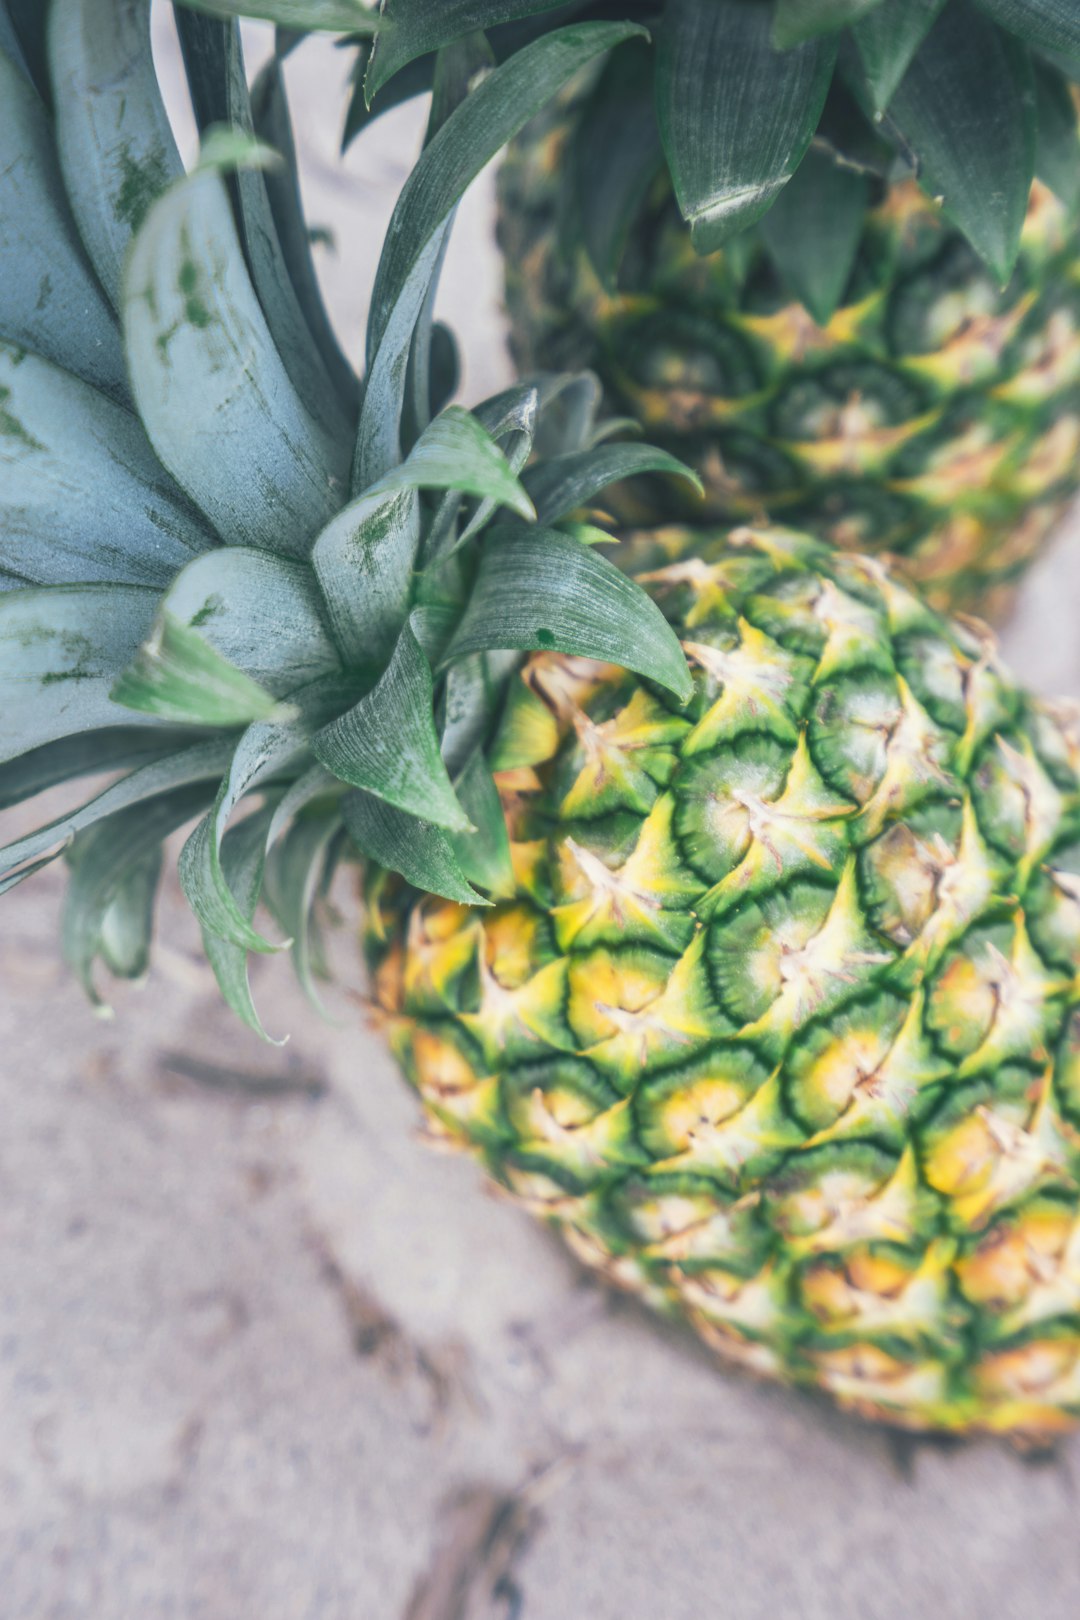 Photo by: Pineapple Supply Co. on Unsplash